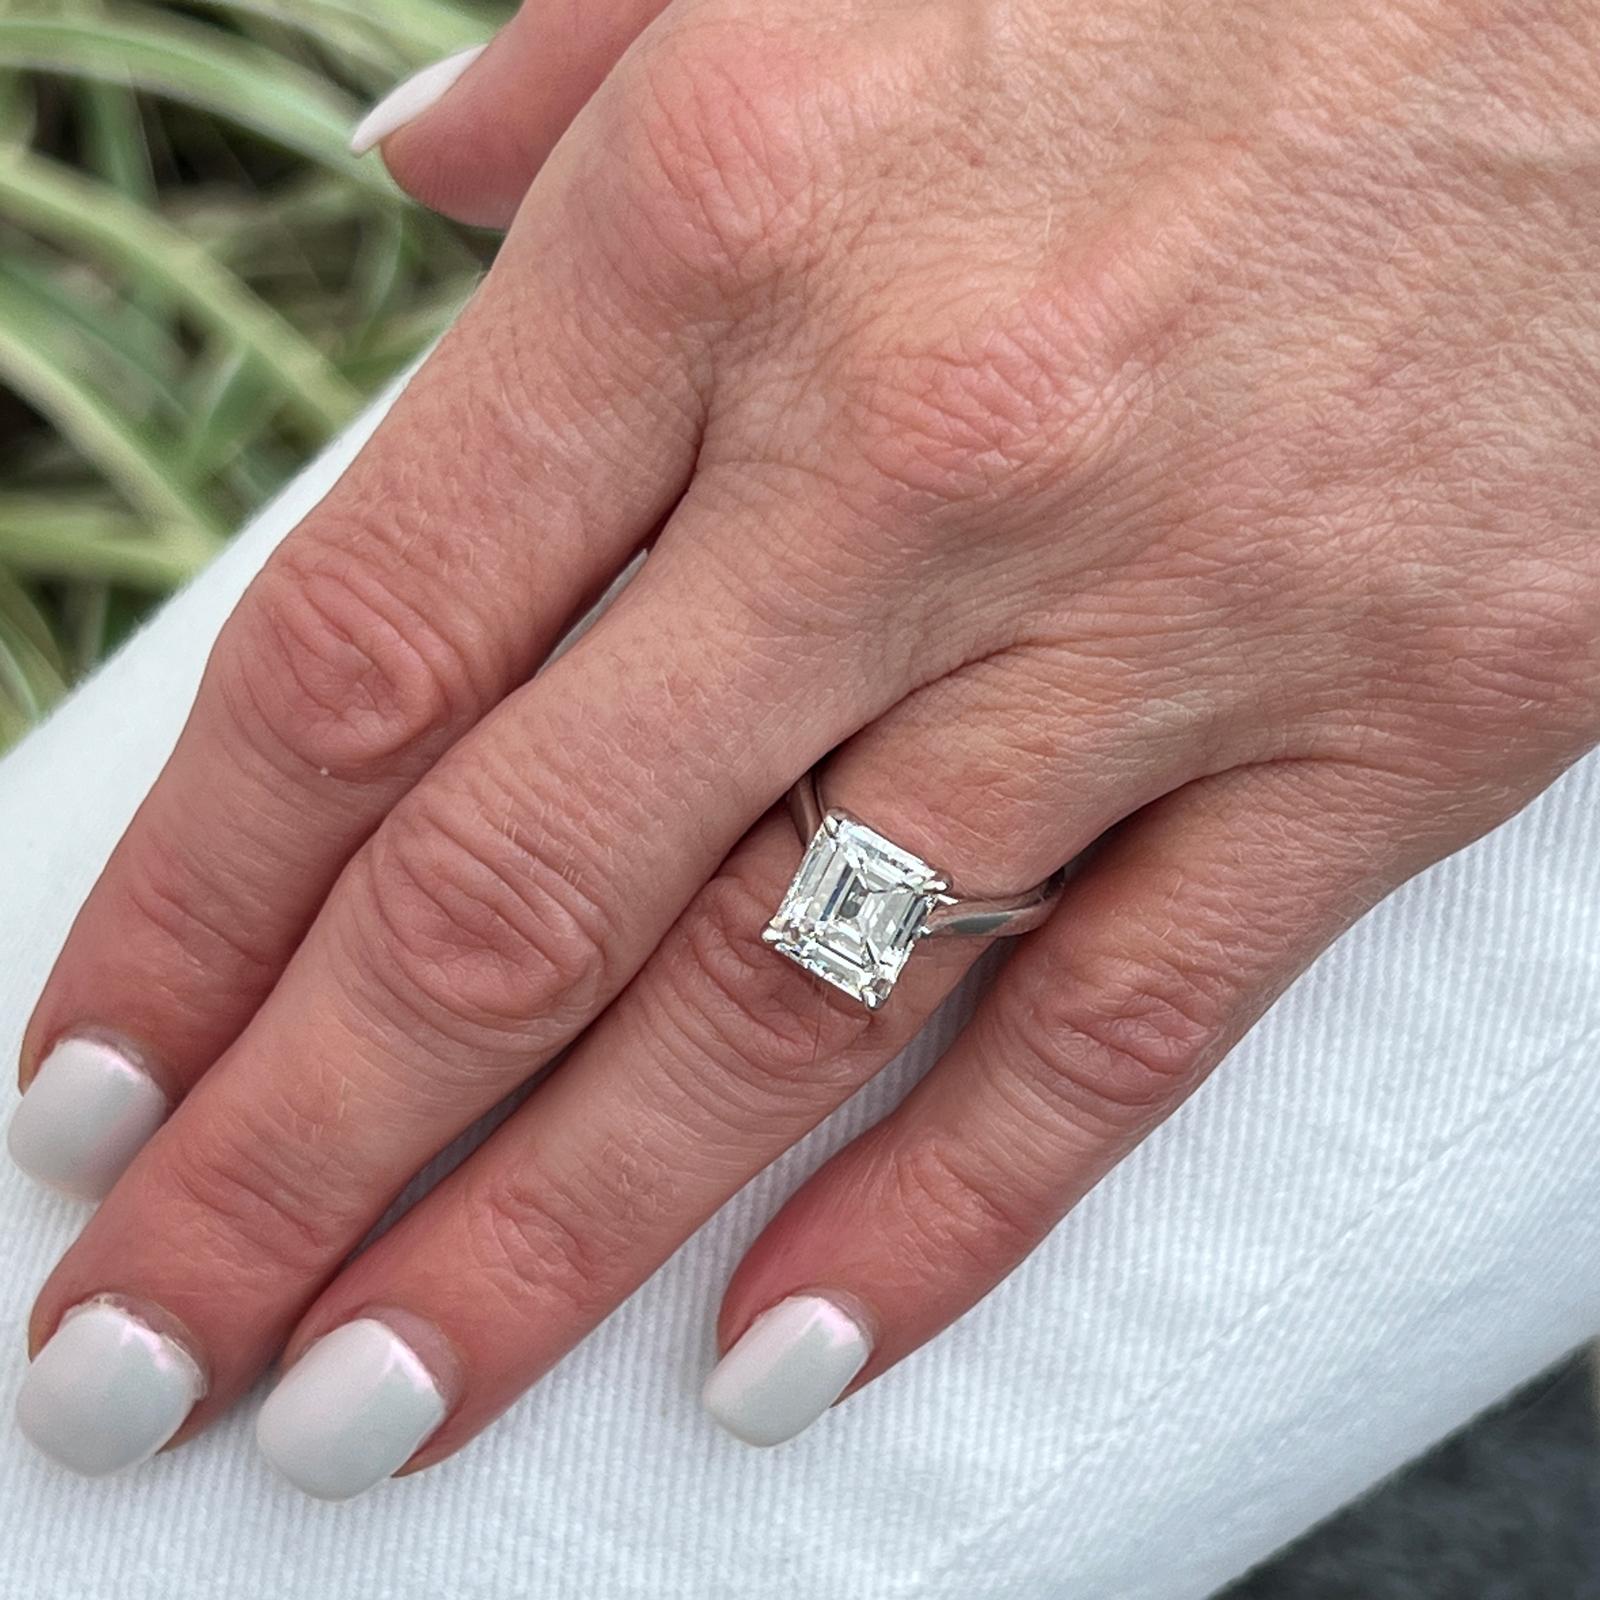 Beautiful and elegant 4.04 carat emerald cut diamond solitaire engagement ring crafted in 18 karat white gold. The emerald cut diamond weighs 4.04 carats and is GIA certified F color and VS1 clarity. See the report below. THe ring is currently size